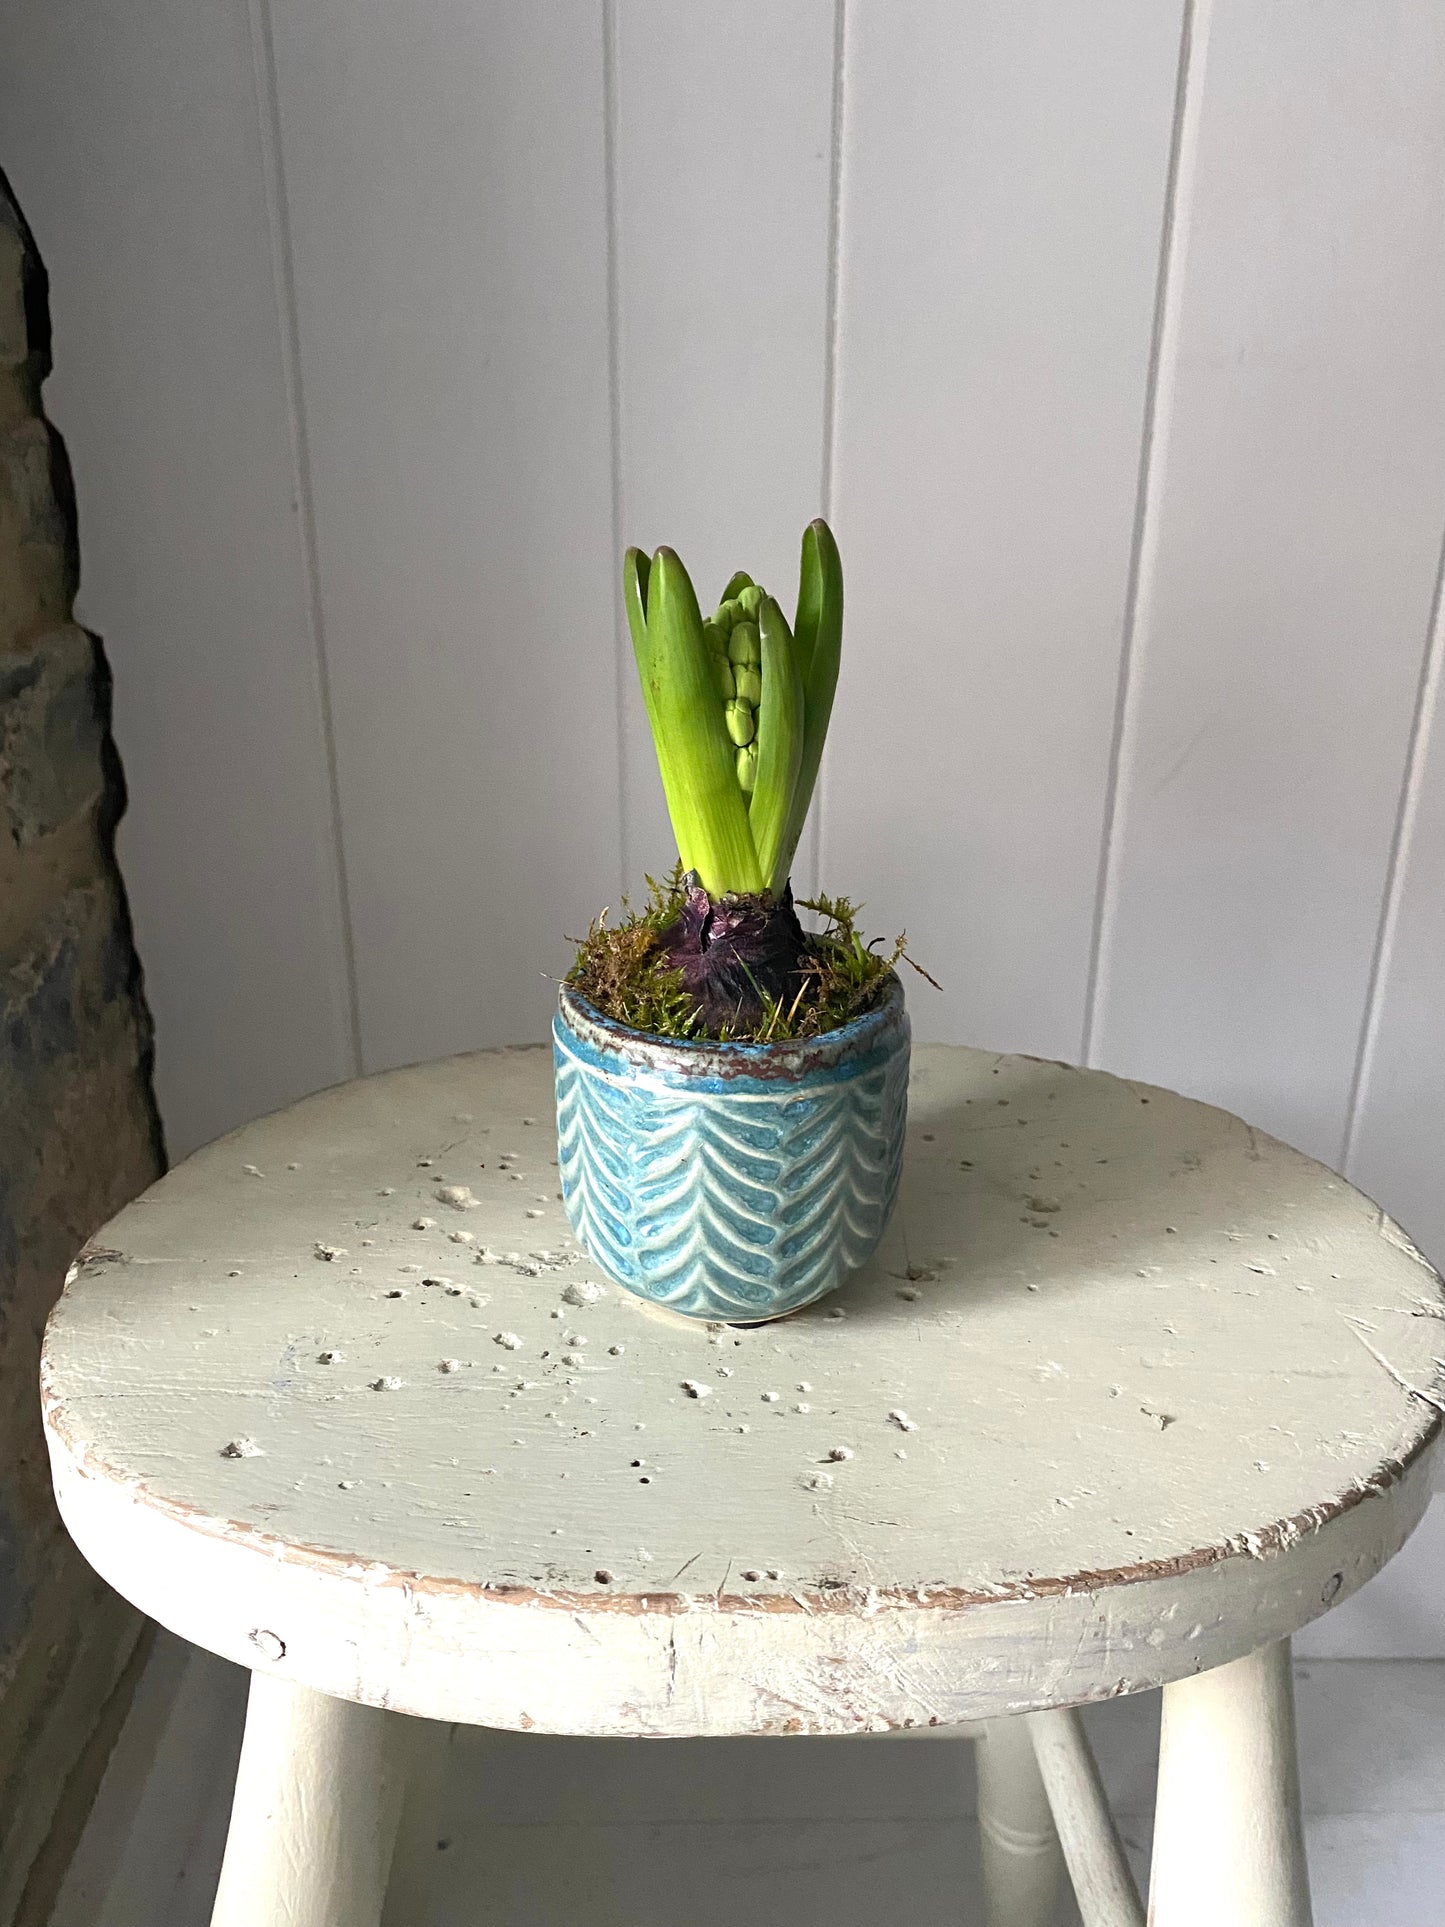 Antique feel celadon ceramic pot planted with a Hyacinth bulb